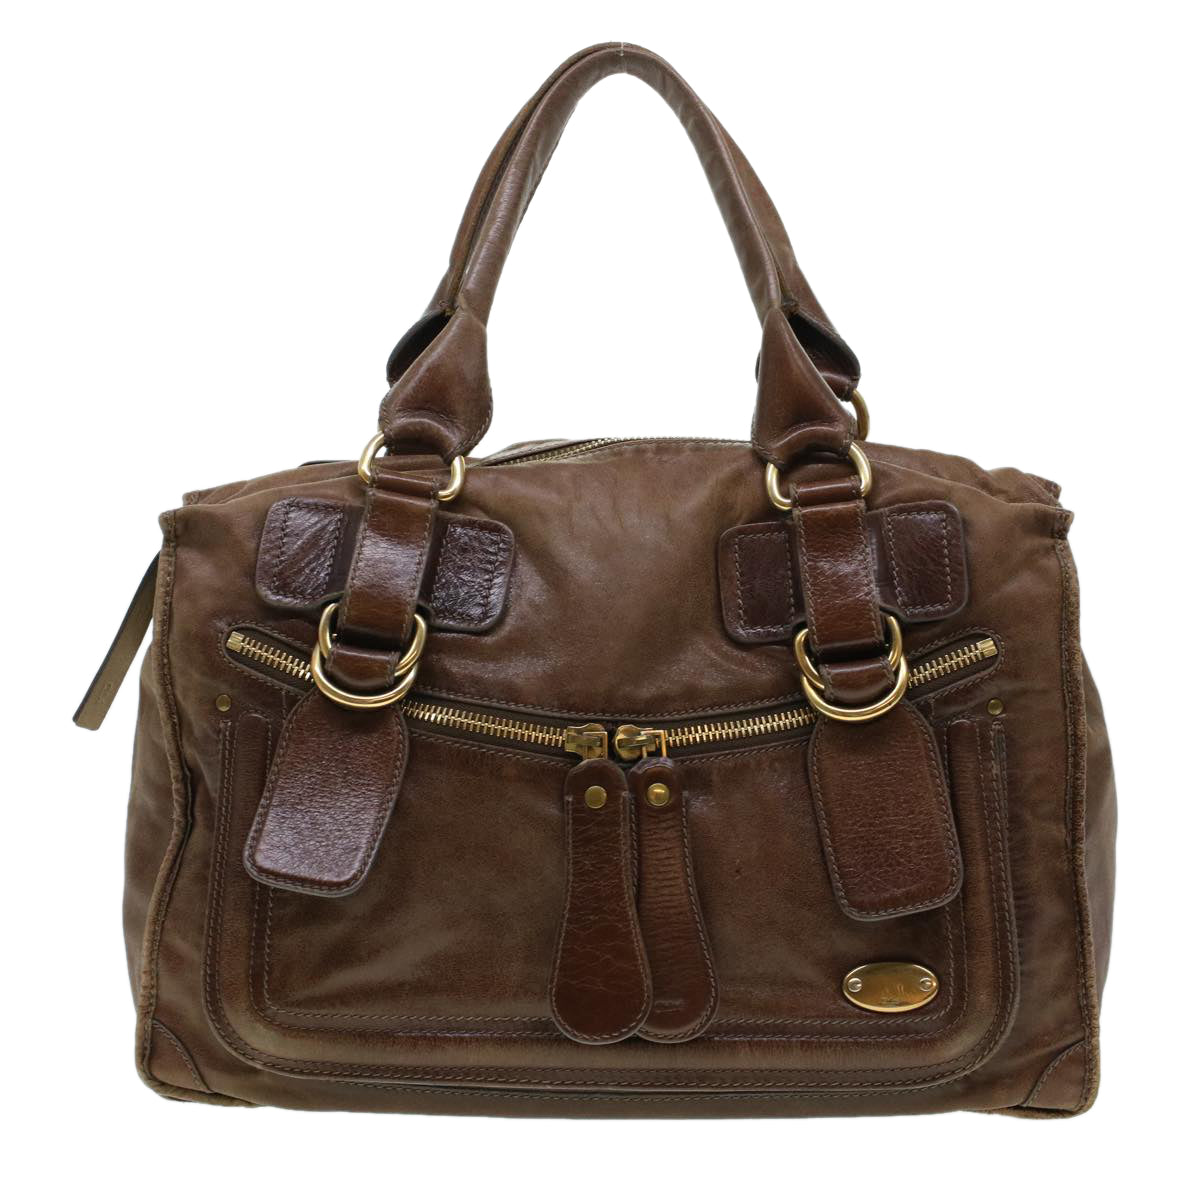 Chloe Tote Bag Leather Brown Auth bs5947